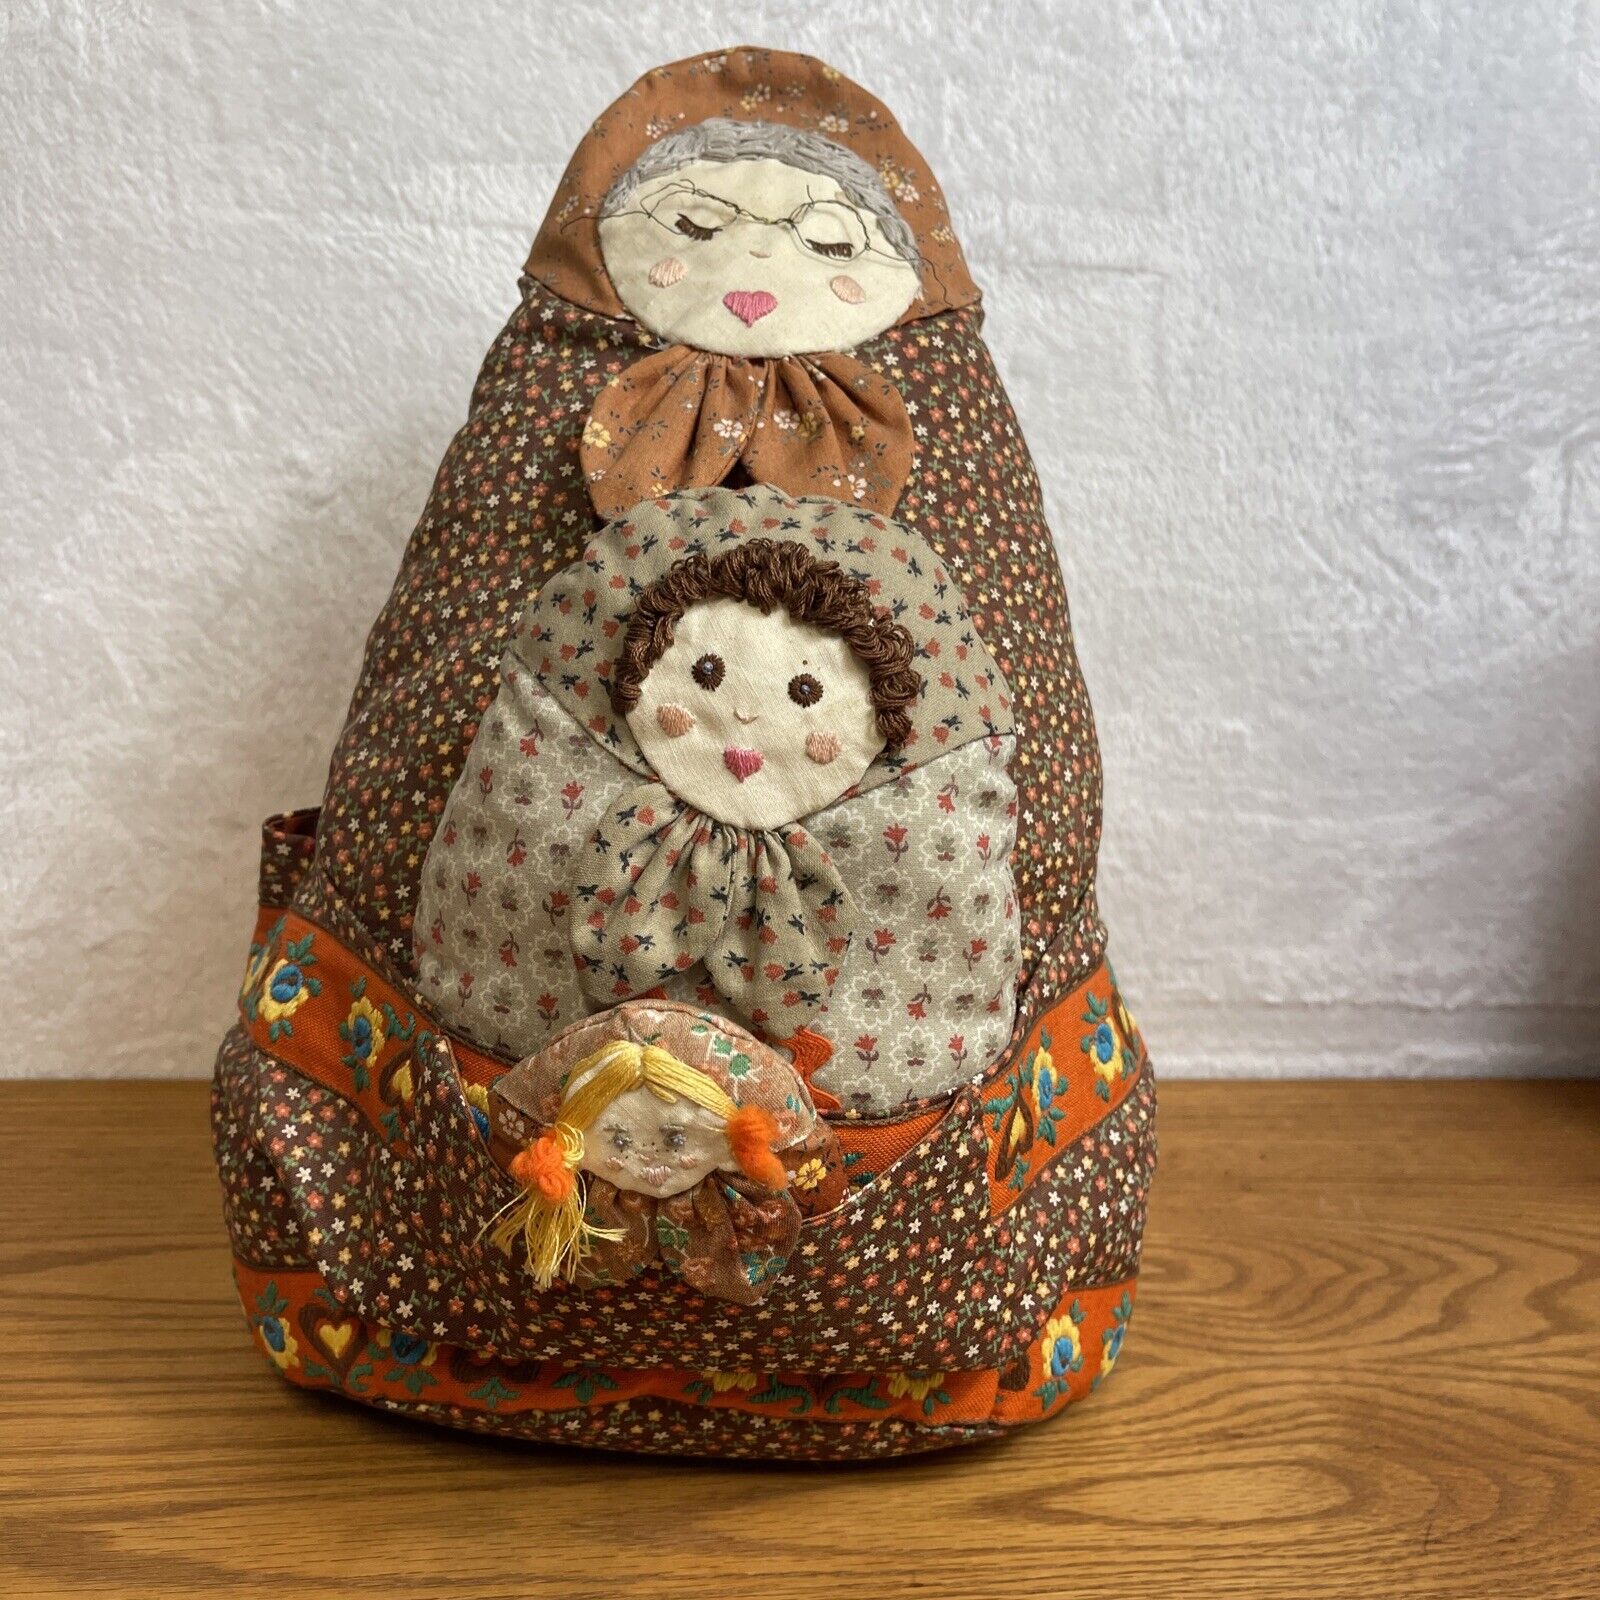 Handmade Caddy Granny and Stacking Babies Weighted Doll Pockets Happy Stitching